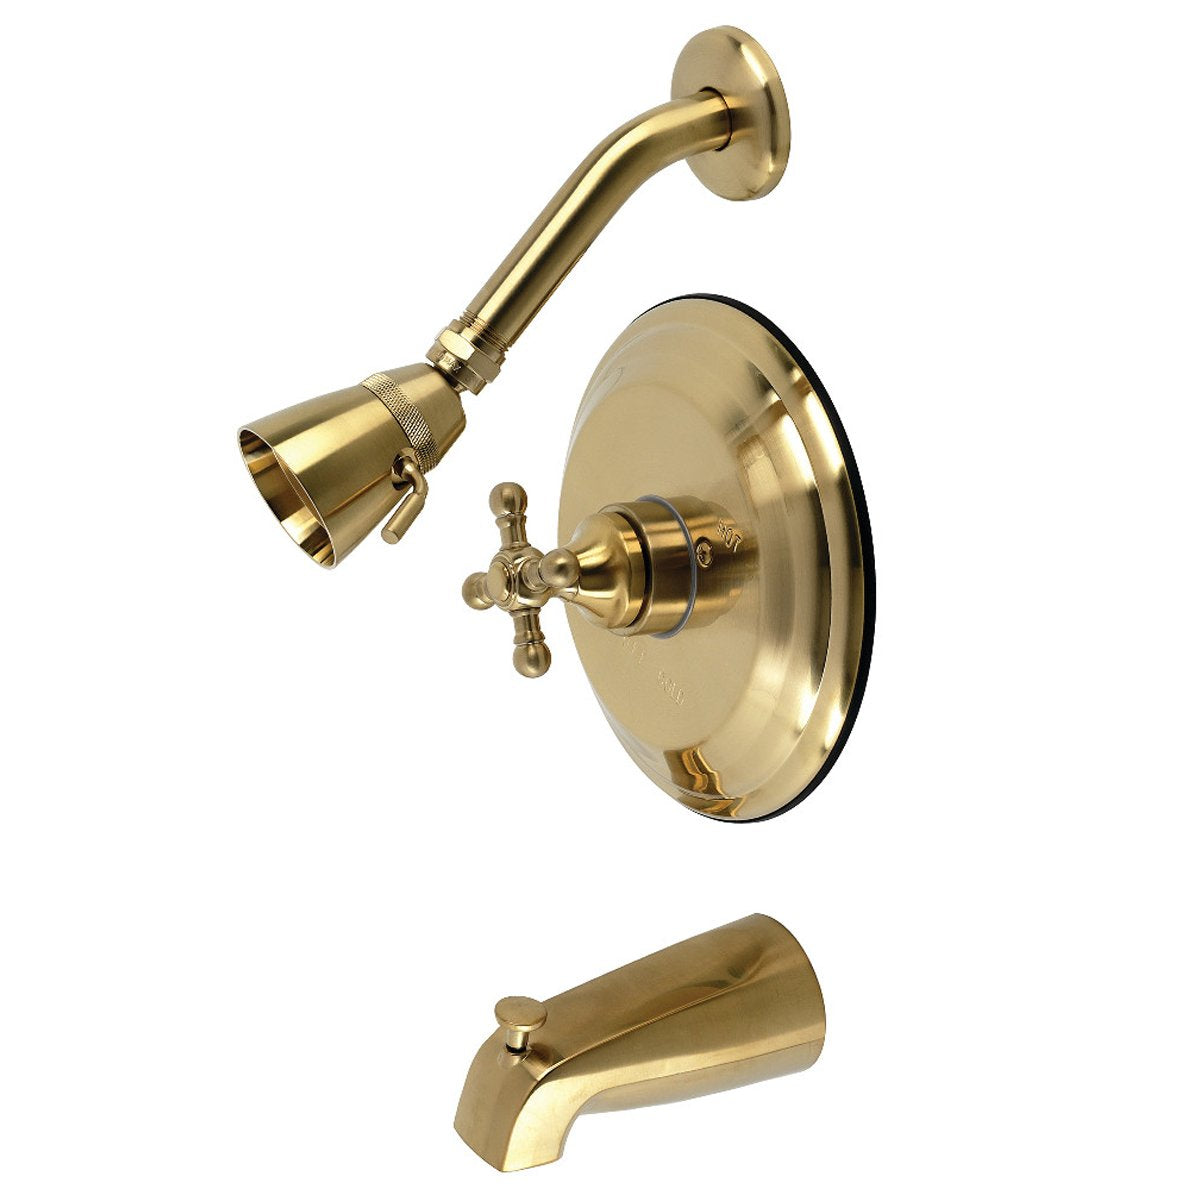 Kingston Brass Metropolitan Tub and Shower Faucet in Brushed Brass